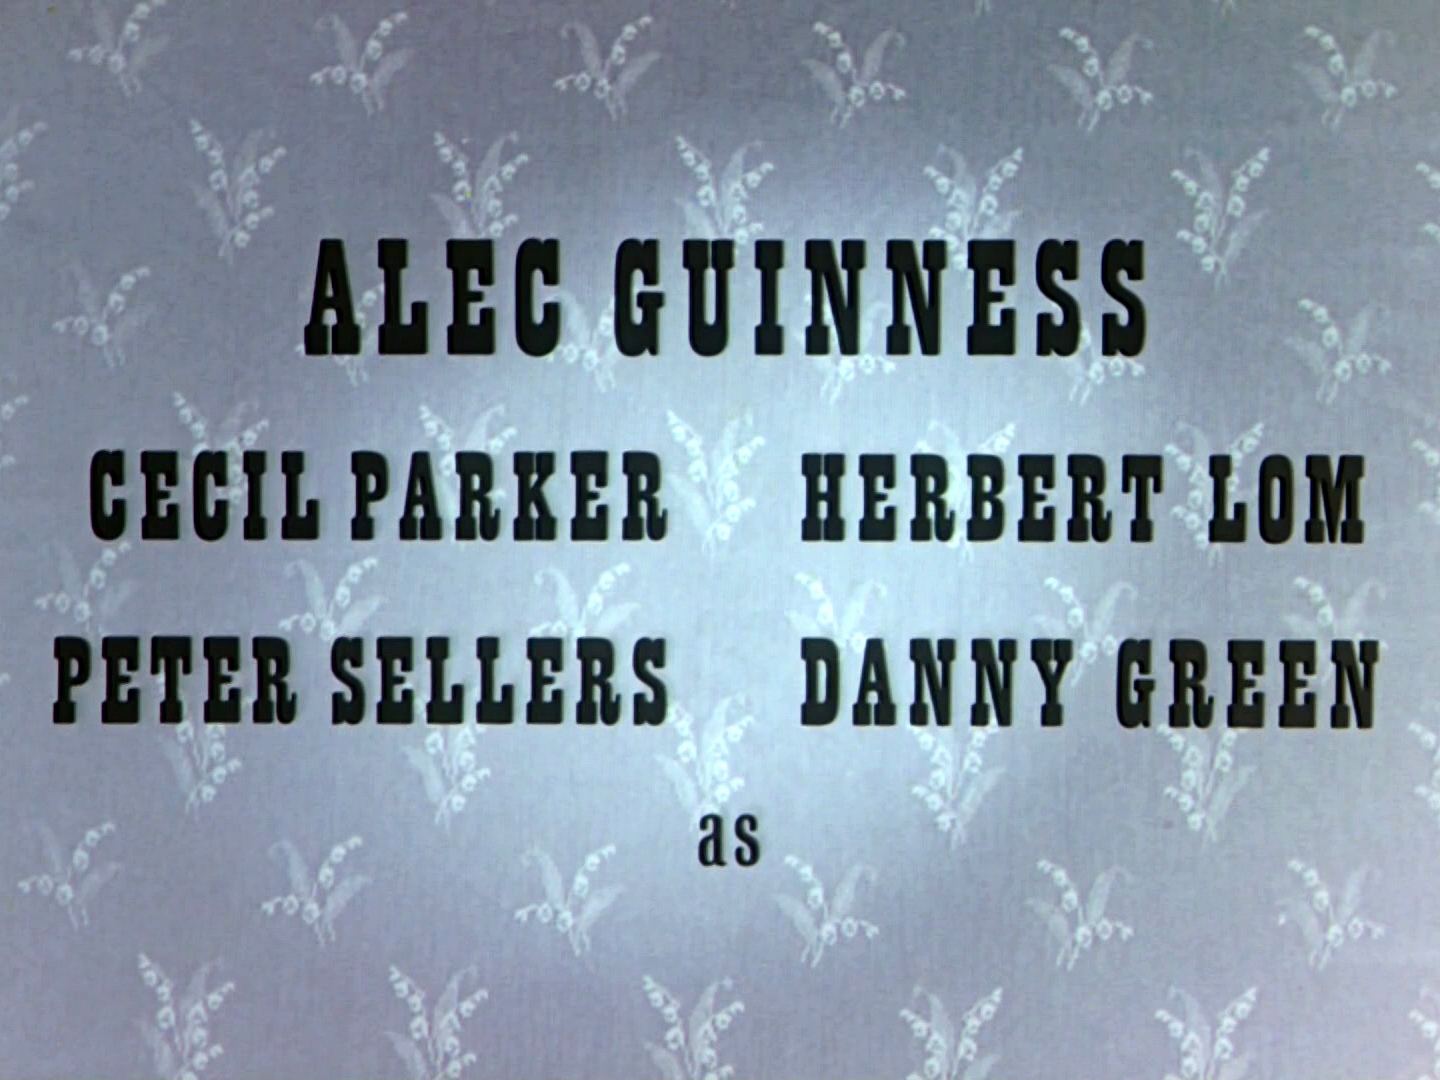 Main title from The Ladykillers (1955) (4).  Alec Guiness Cecil Parker, Herbert Lom, Peter Sellers, Danny Green as